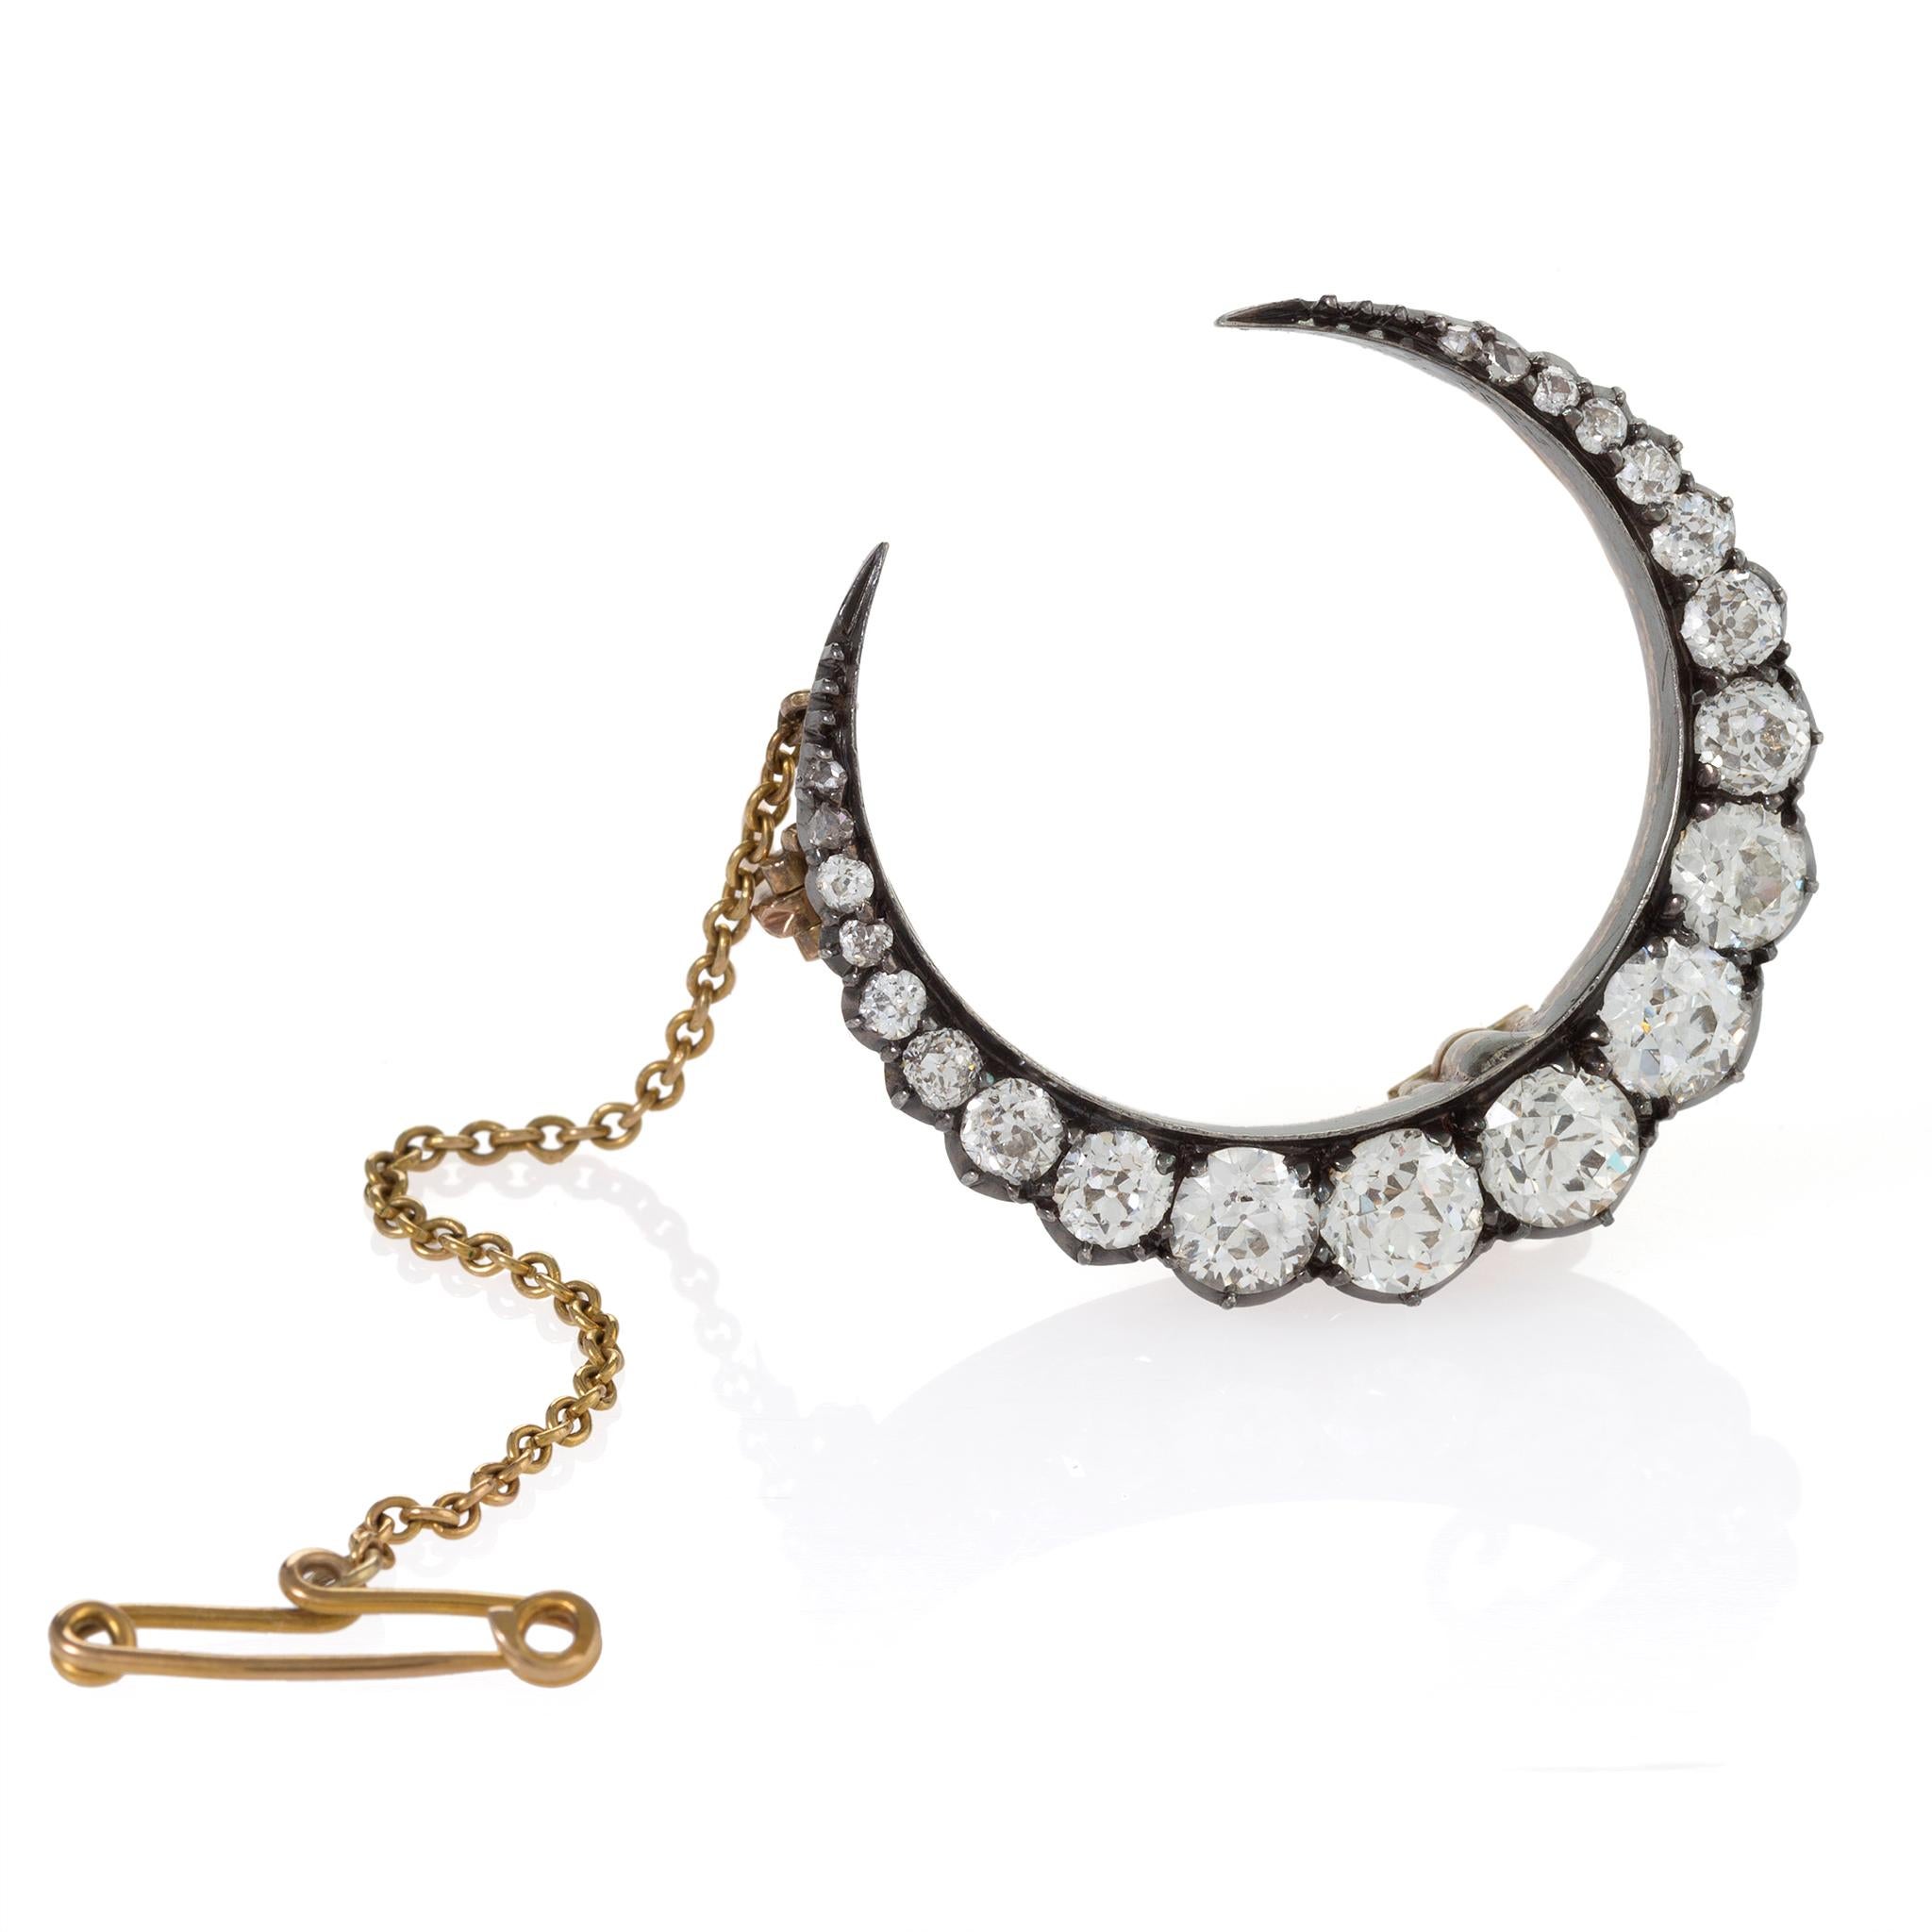 Old European Cut Silver-Topped Gold and Diamond Crescent Moon Brooch